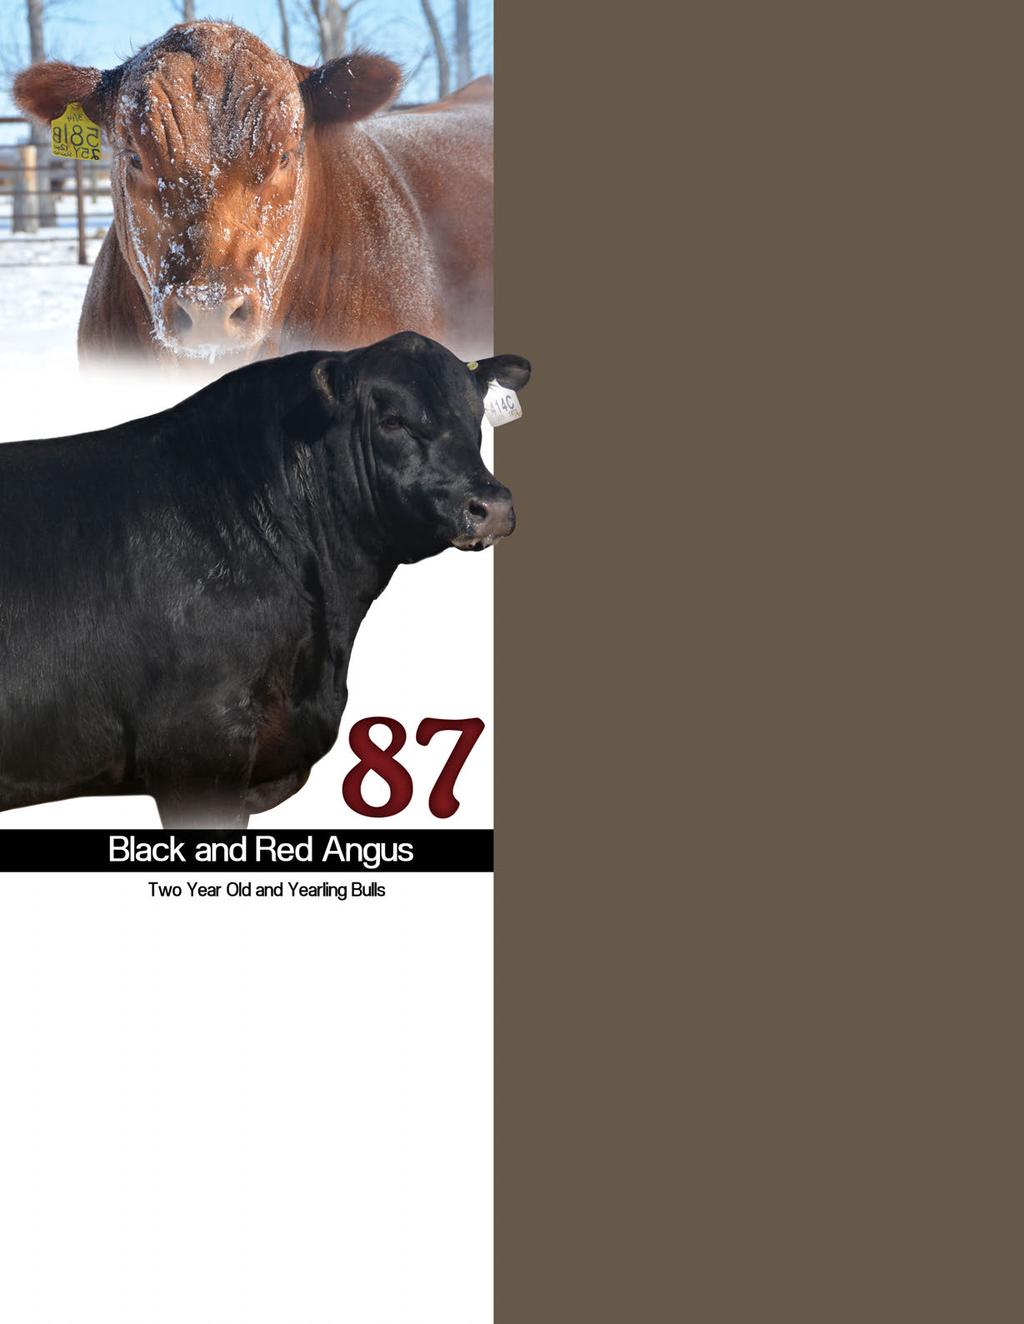 Welcome to the Blairs.Ag 2018 Pursuit of Excellence bull sale - April 3, 2018-1:00 PM Jackson Cattle Co.